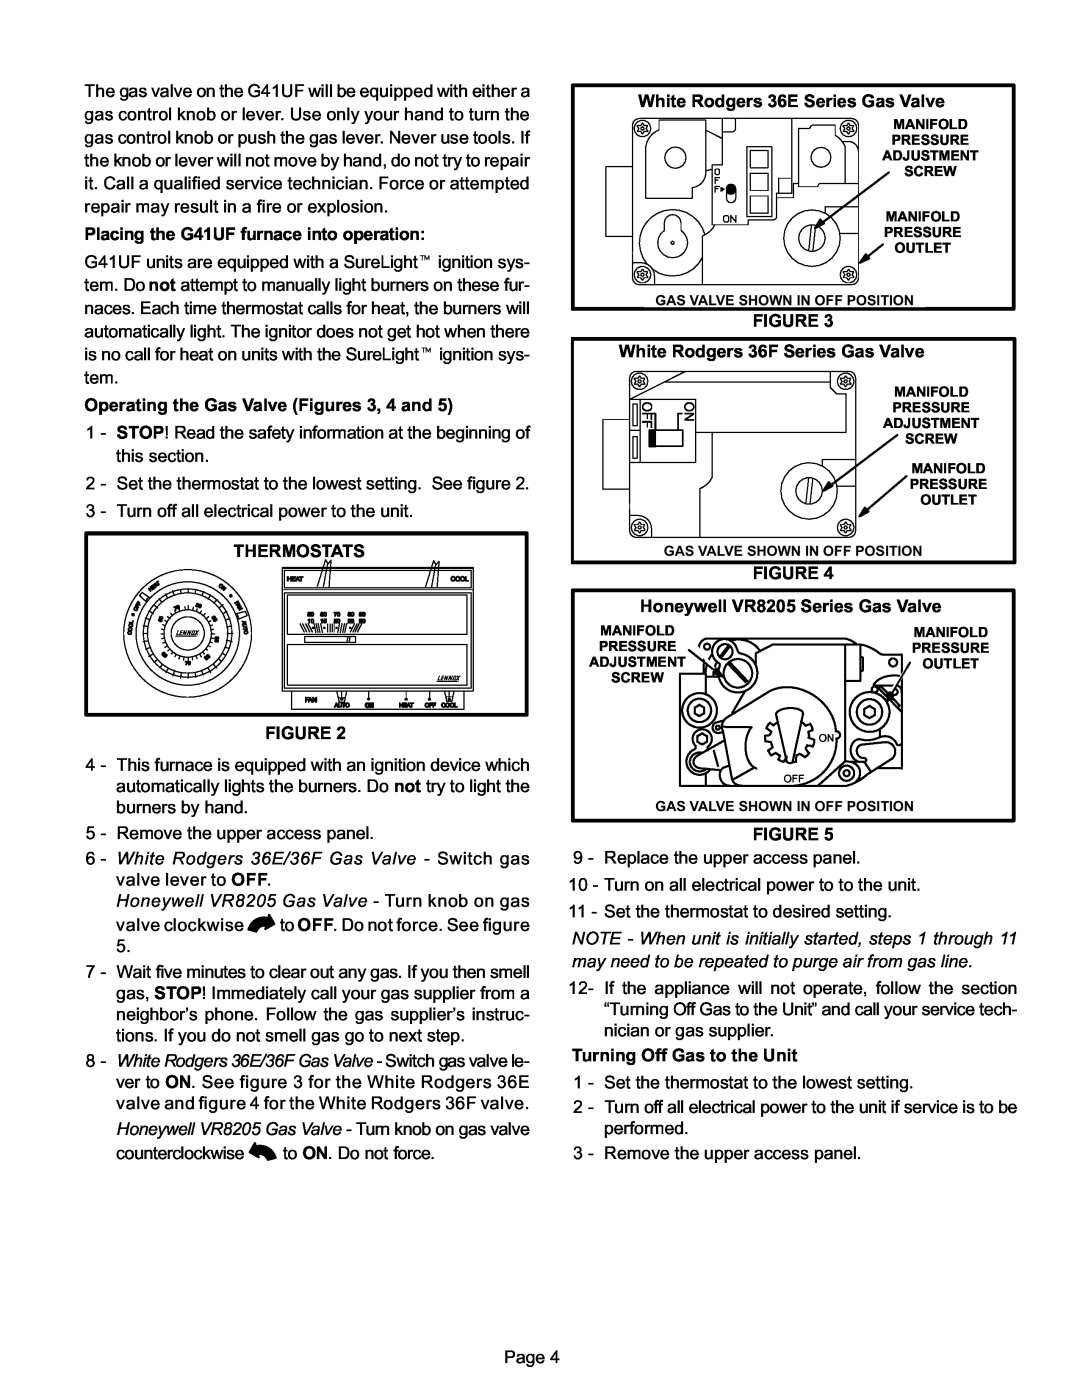 Lenoxx Electronics manual Placing the G41UF furnace into operation 